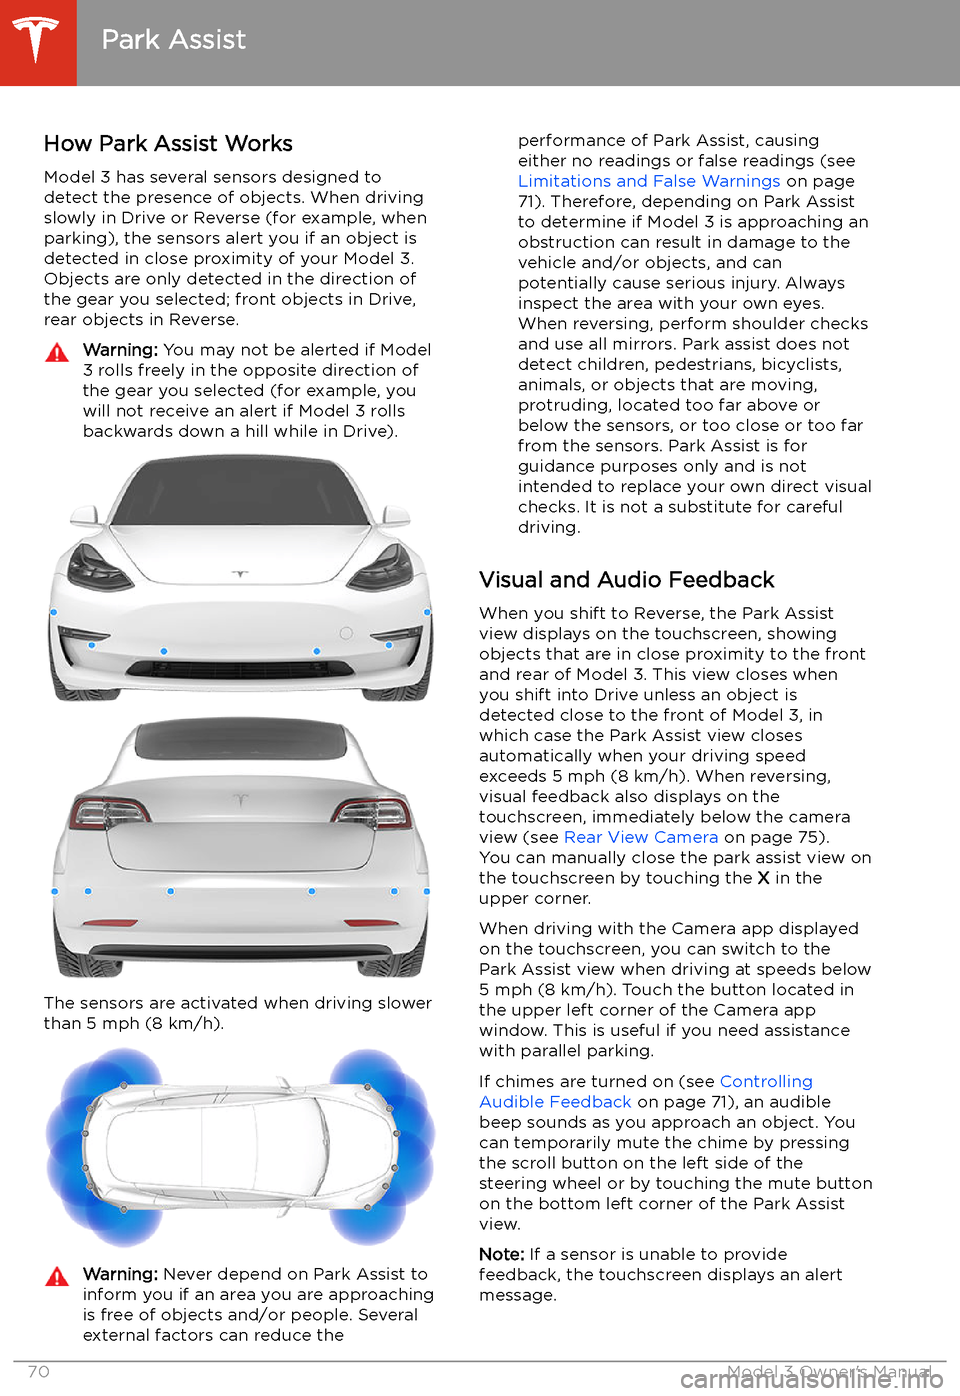 TESLA MODEL 3 2020  Owners Manuals Park Assist
How Park Assist Works
Model 3 has several sensors designed to
detect the presence of objects. When driving
slowly in Drive or Reverse (for example, when
parking), the sensors alert you if 